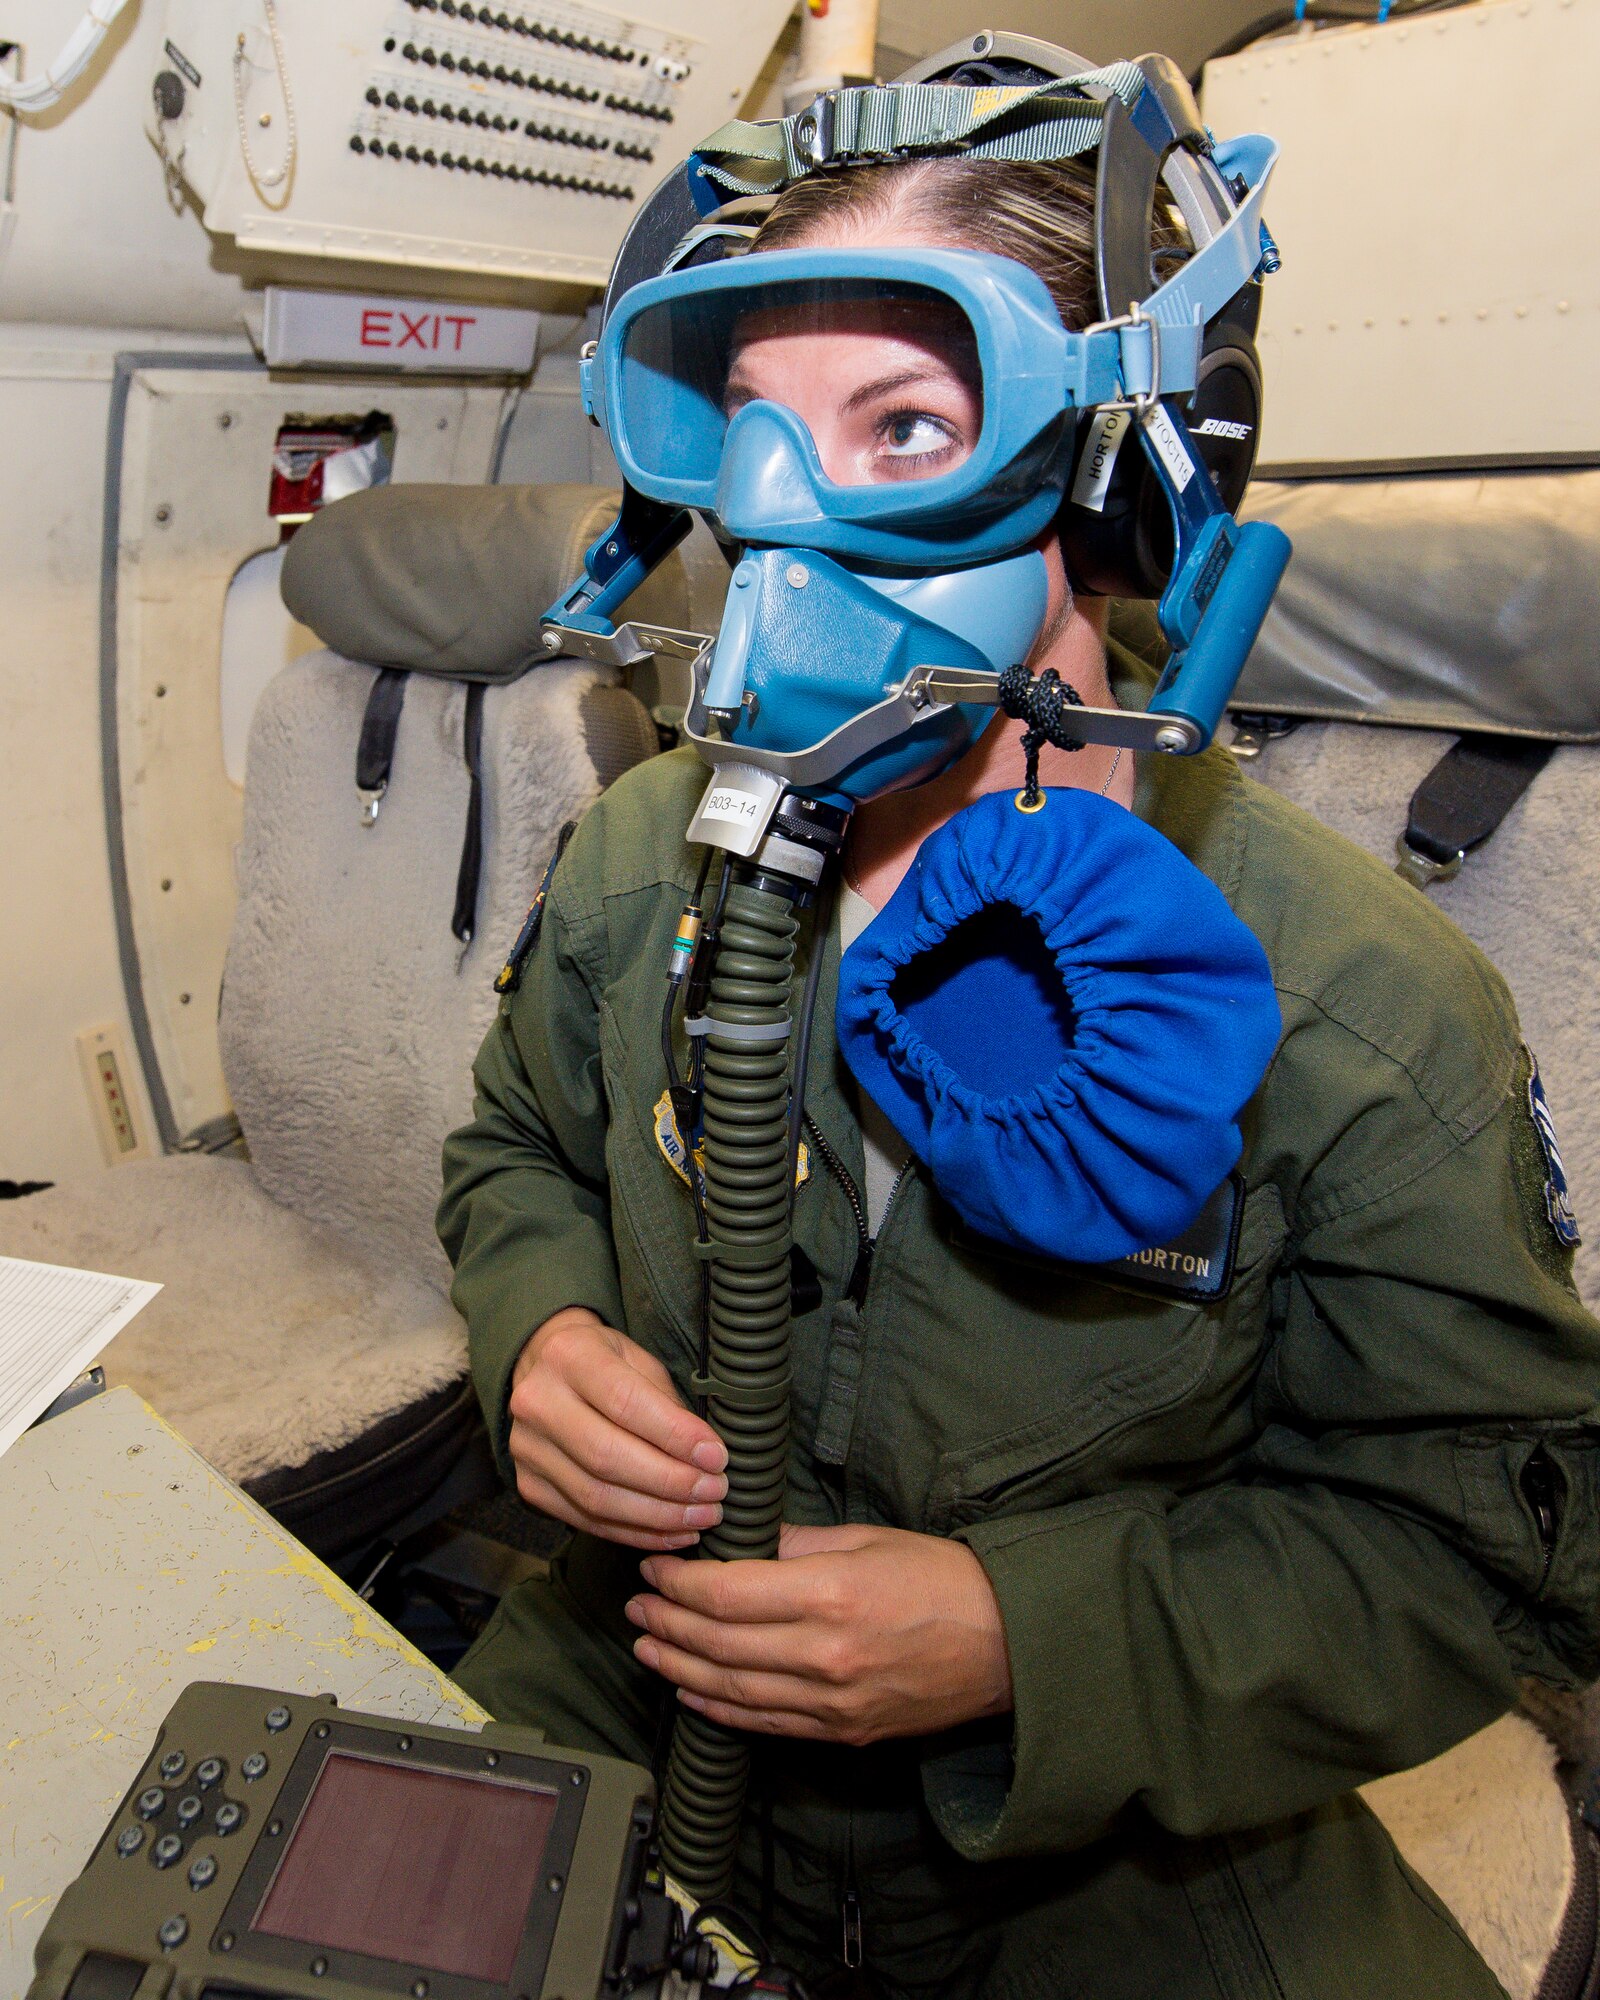 U.S. Air Force Staff Sgt. Jessica Horton, a communication systems technician with the 116th Air Control Wing (ACW), Georgia Air National Guard, tests her oxygen mask aboard an E-8C Joint STARS prior to a mission in the Boars Nest 2015 exercise, Robins Air Force Base, Ga., Aug. 20, 2015. The 116th ACW hosted the eighth annual Boars Nest Large Force Exercise bringing together more than 20 joint-force units and 55 different aircraft for aircrew training in a realistic land and maritime threat environment. Crews flying the E-8C Joint STARS manned platform, used their unique battle management, command and control, intelligence, surveillance and reconnaissance capabilities, integrated with other Air National Guard, Air Force, Navy, and Marine aircraft, to complete maritime and land-based missions during the exercise. (U.S. Air National Guard photo by Senior Master Sgt. Roger Parsons/Released)